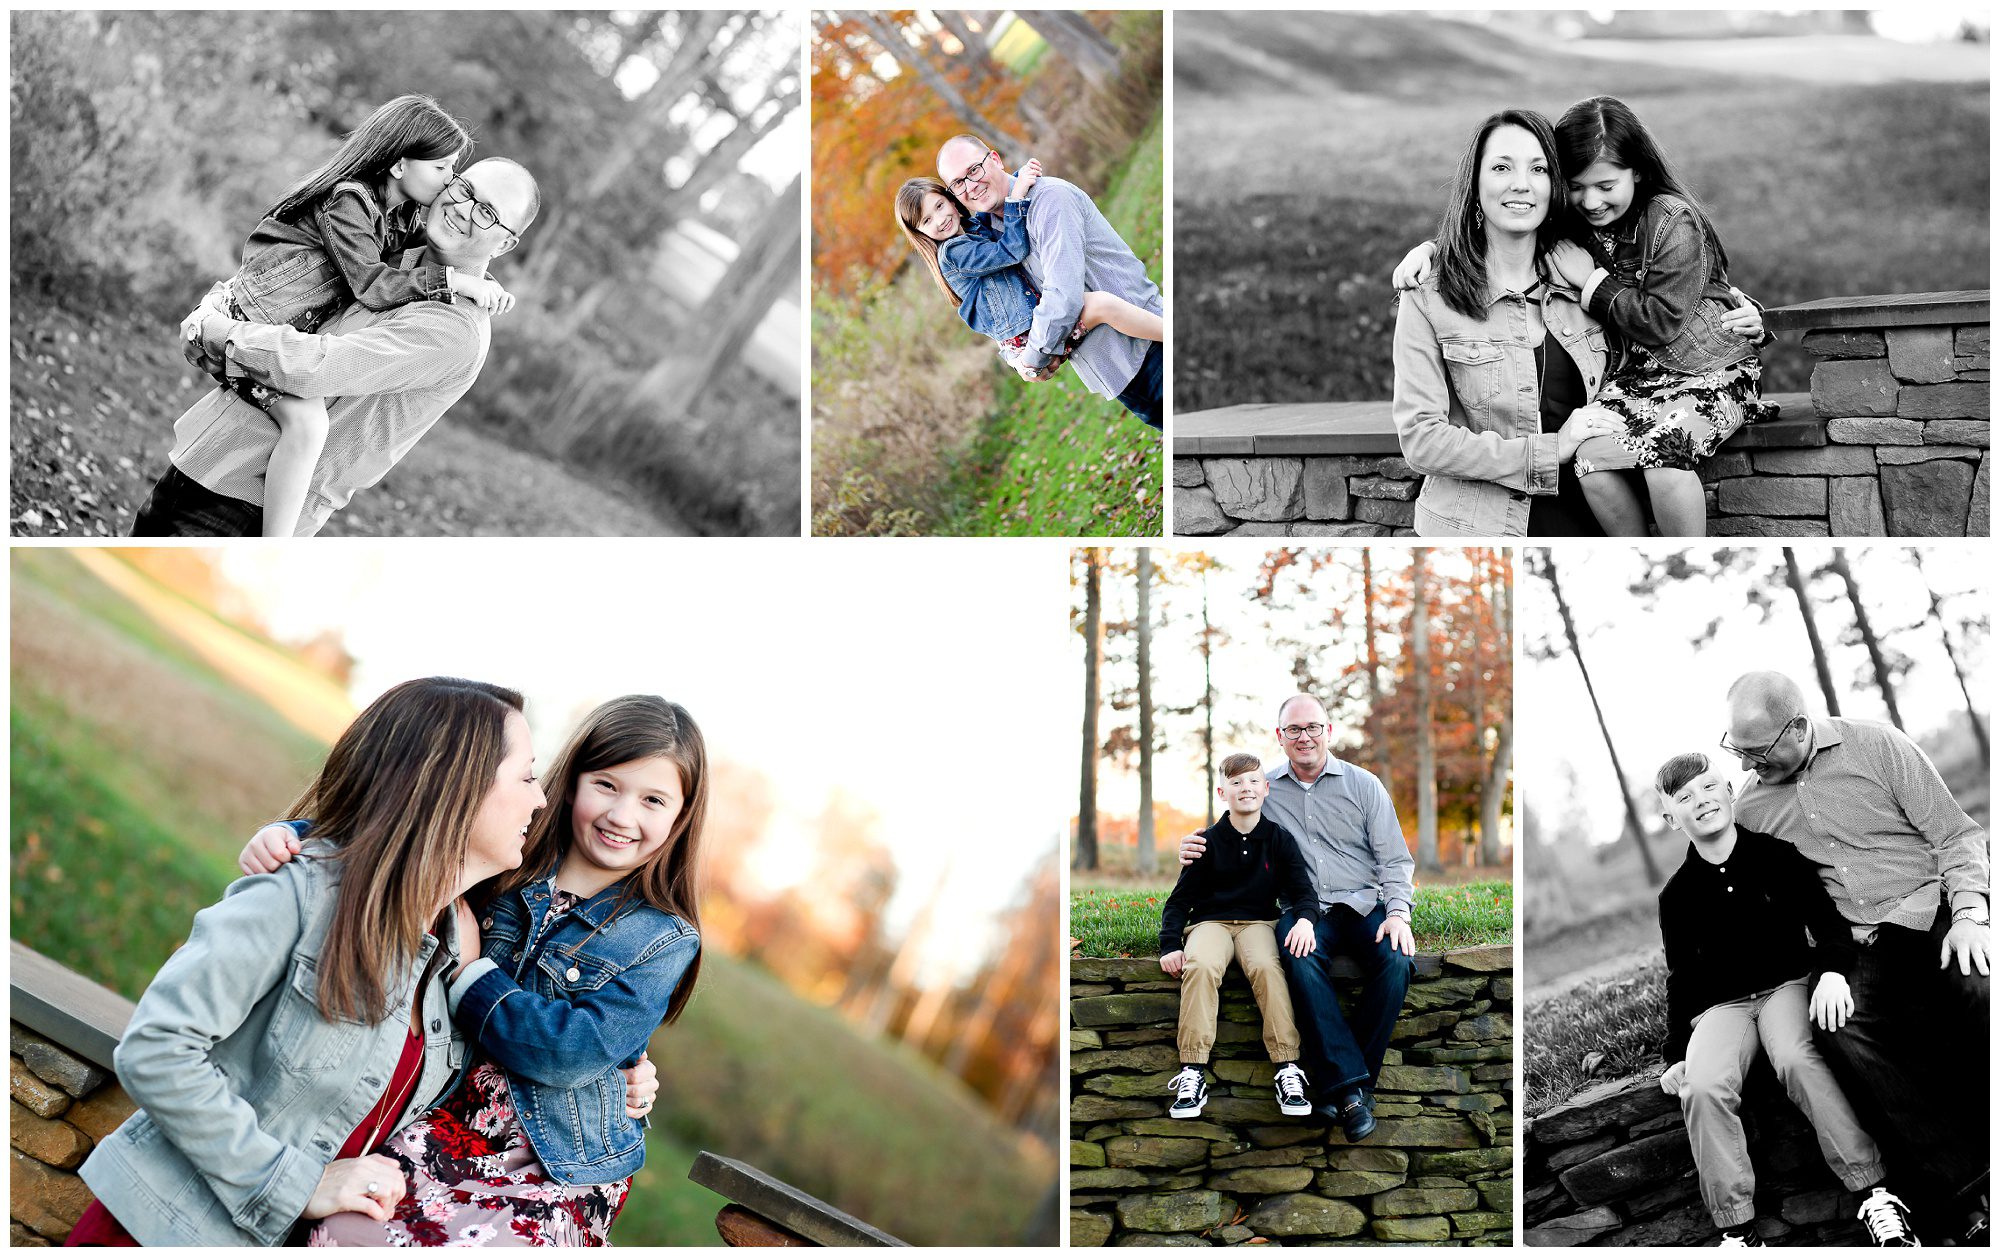 Fluvanna family portraits fall photographer cville louisa pictures siblings virginia session photography charlottesville golf spring creek zion crossroad